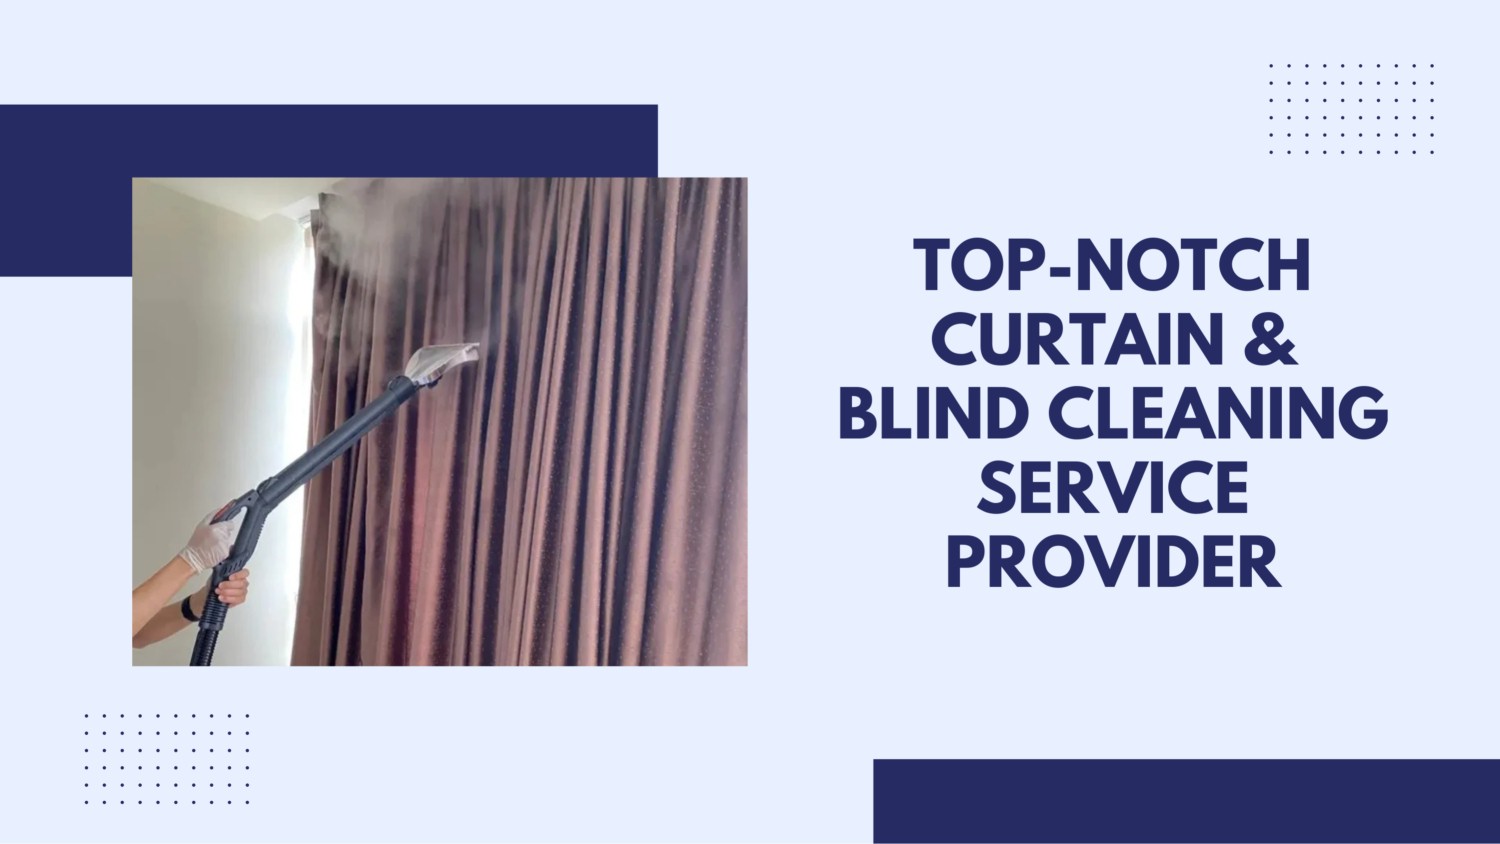 Top-notch Curtain & Blind Cleaning Service Provider